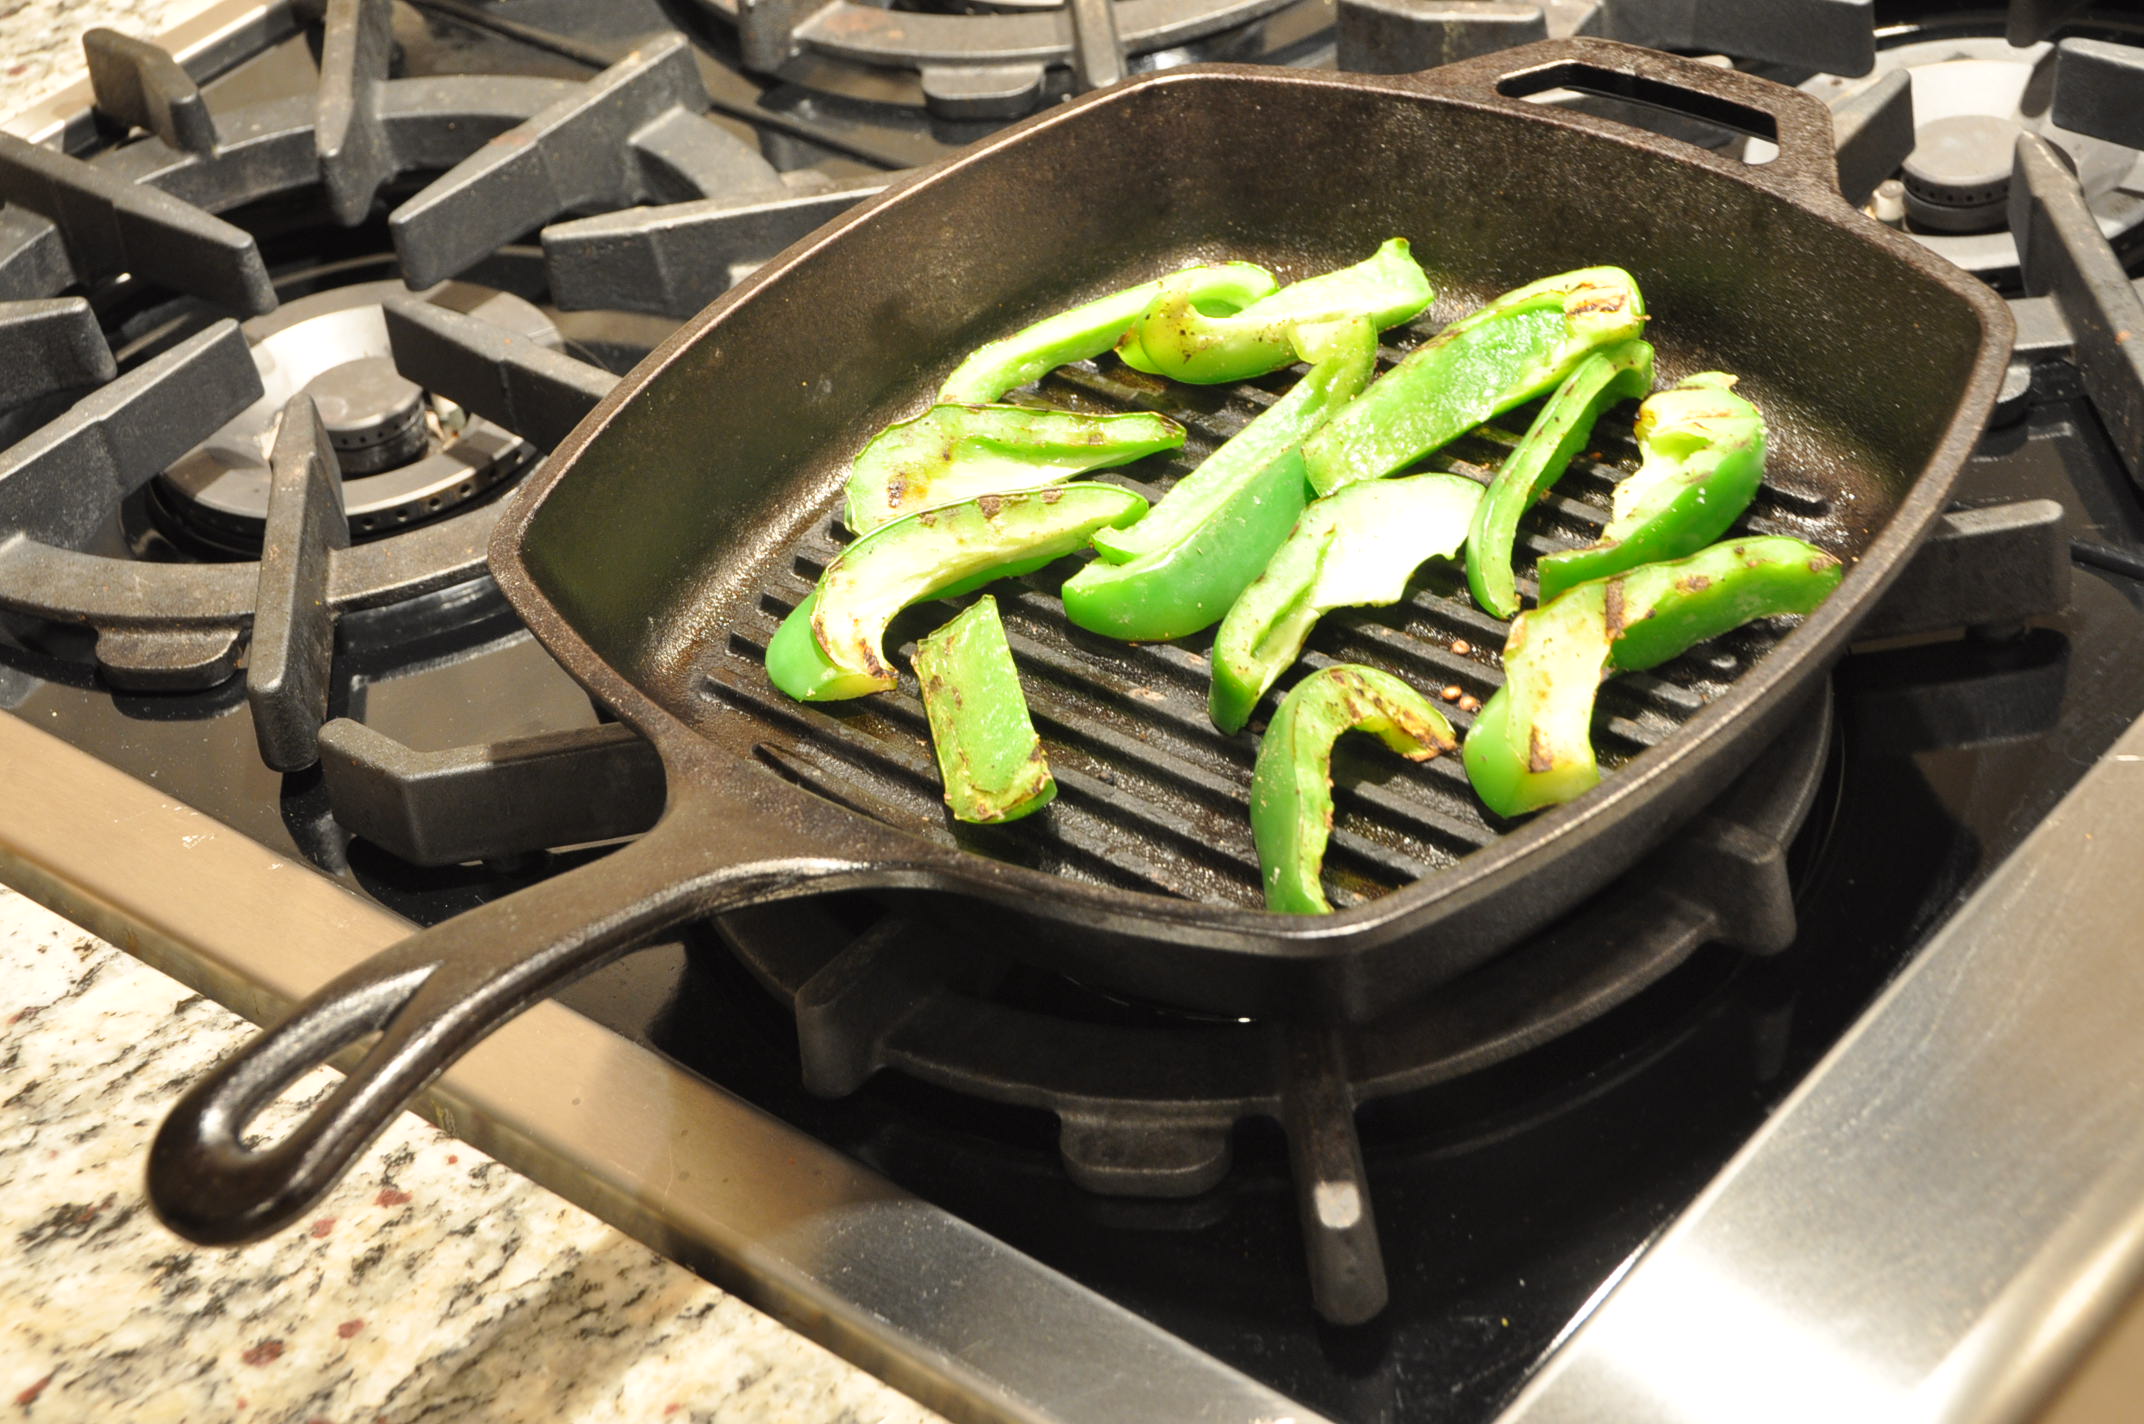 Lodge Logic Cast Iron Grill Pan – I think I love thee